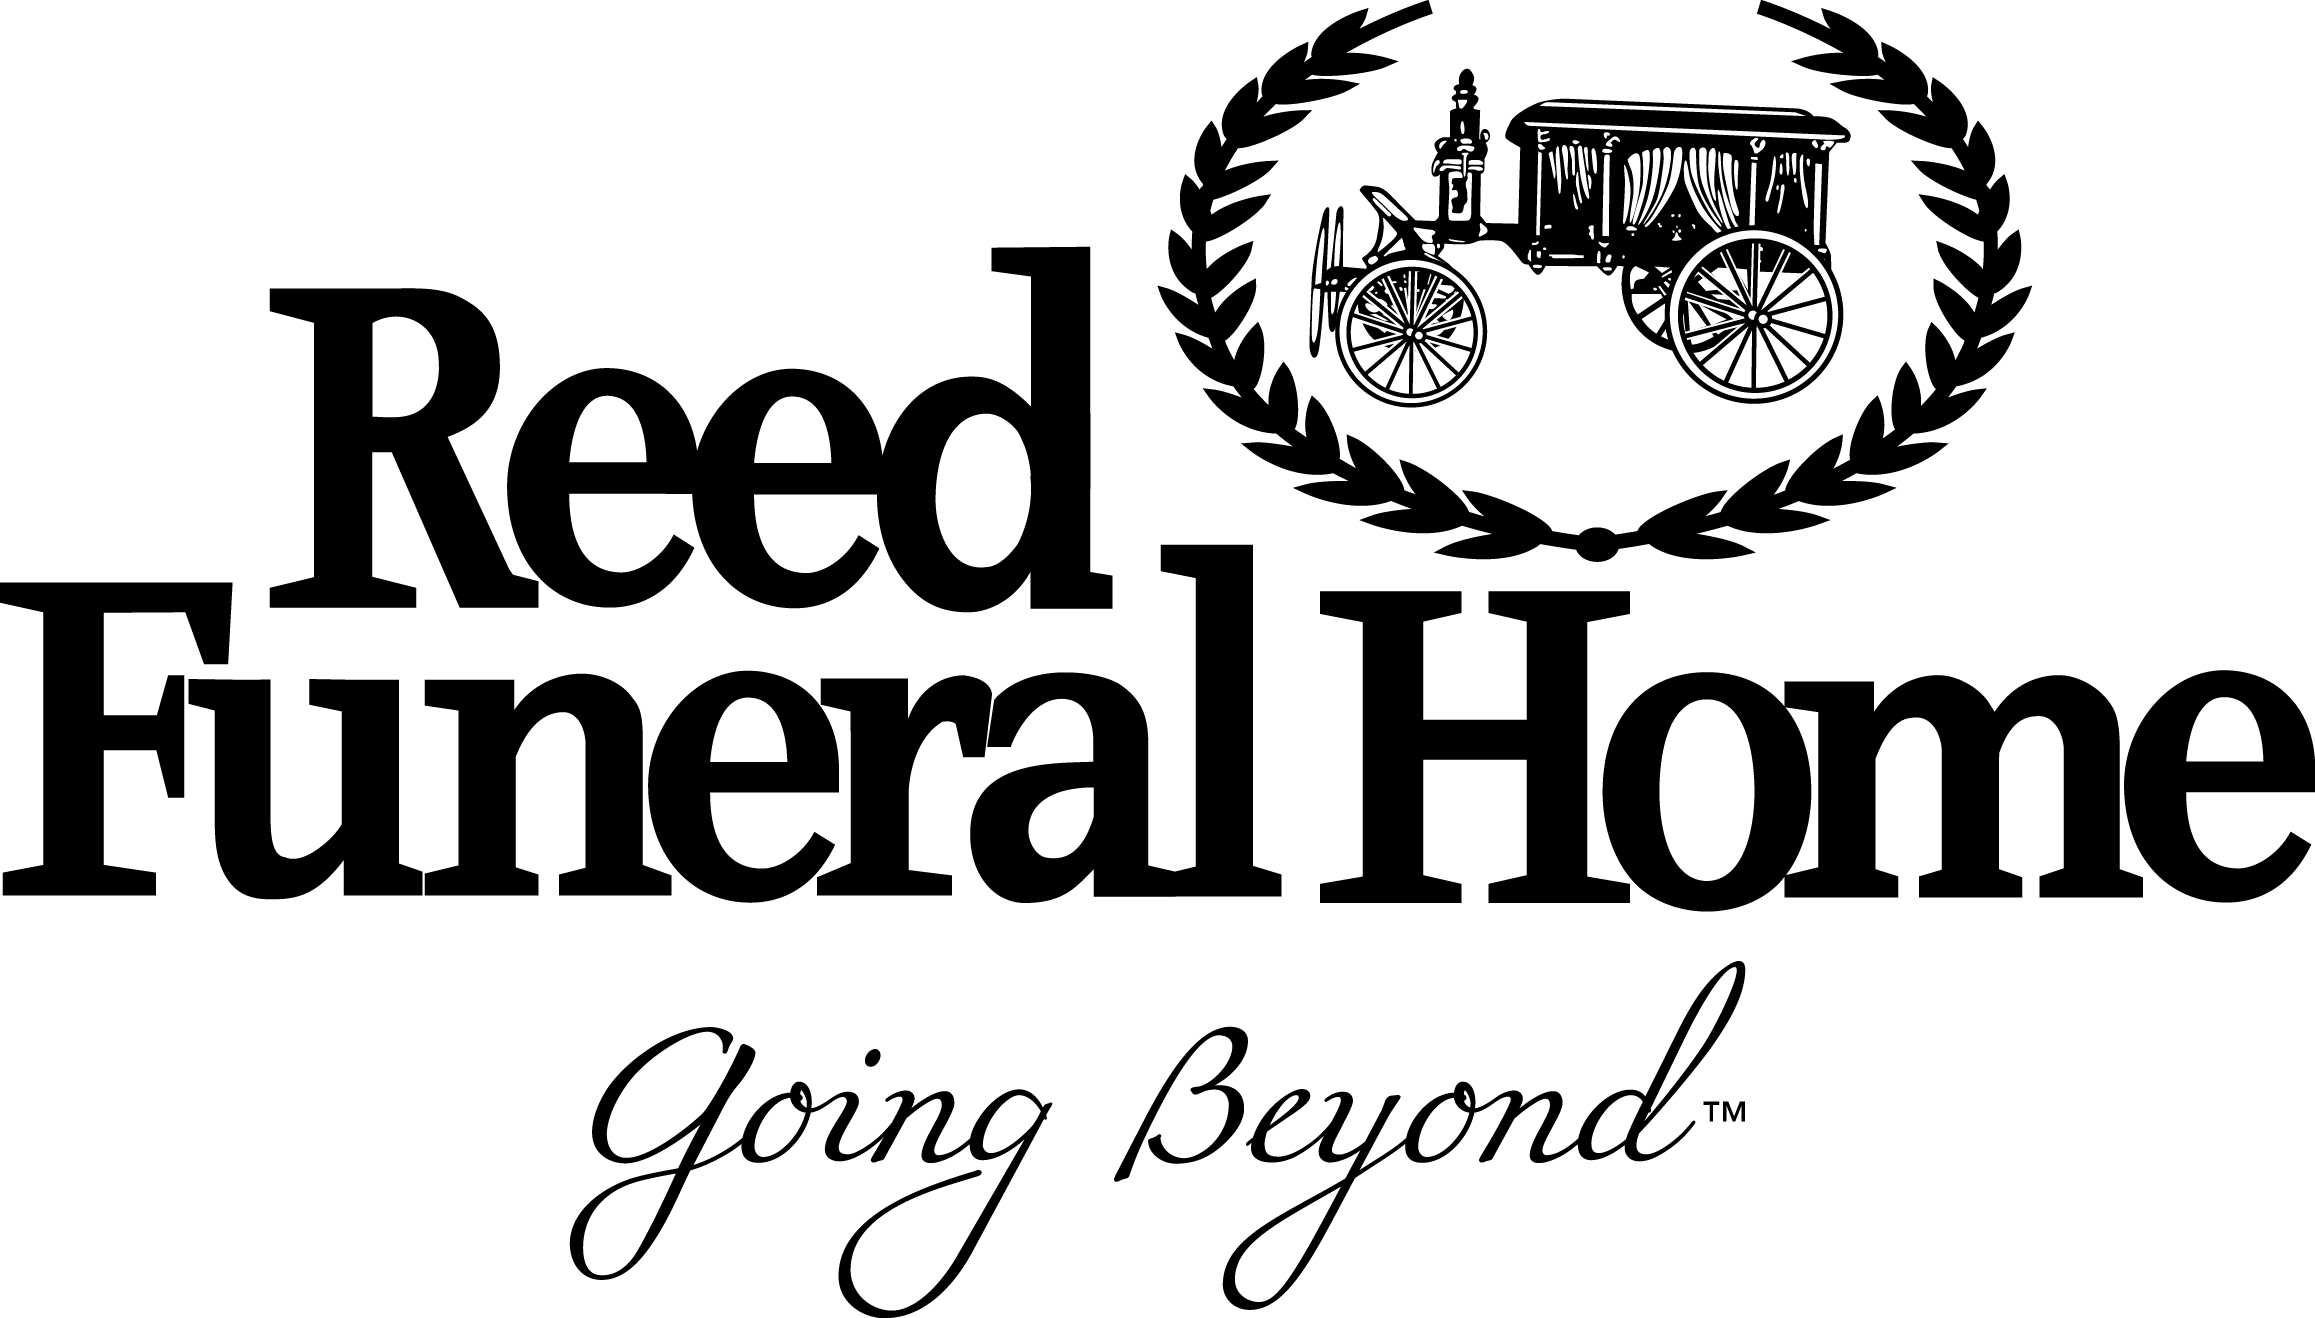 Reed Funeral Home 705 Raff Rd SW, Canton, OH 44710 - YP.com